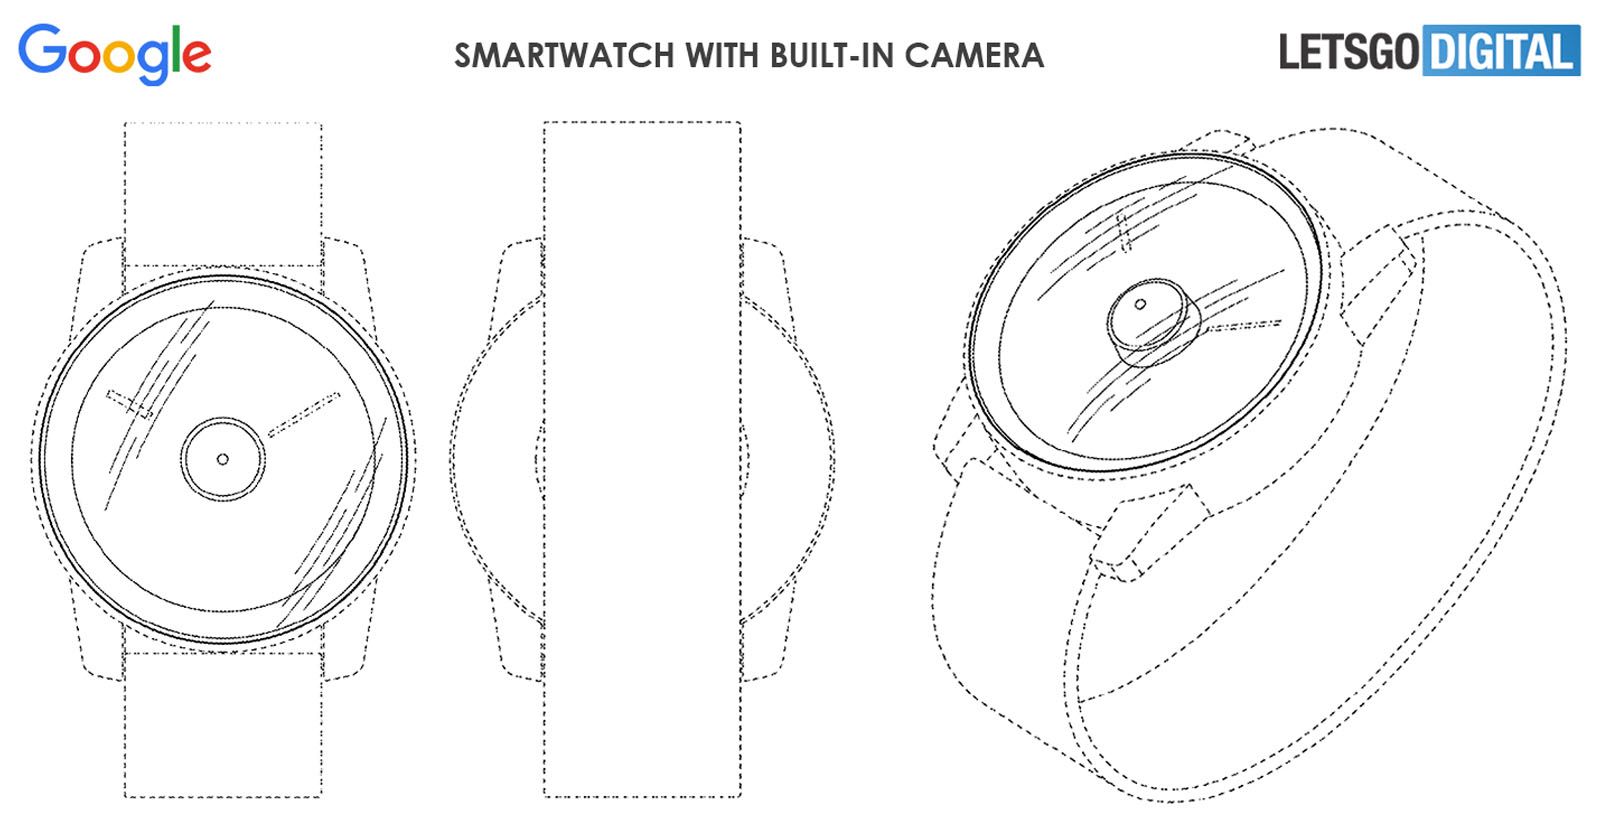 Google Pixel Watch with built-in camera appears in patent image 2